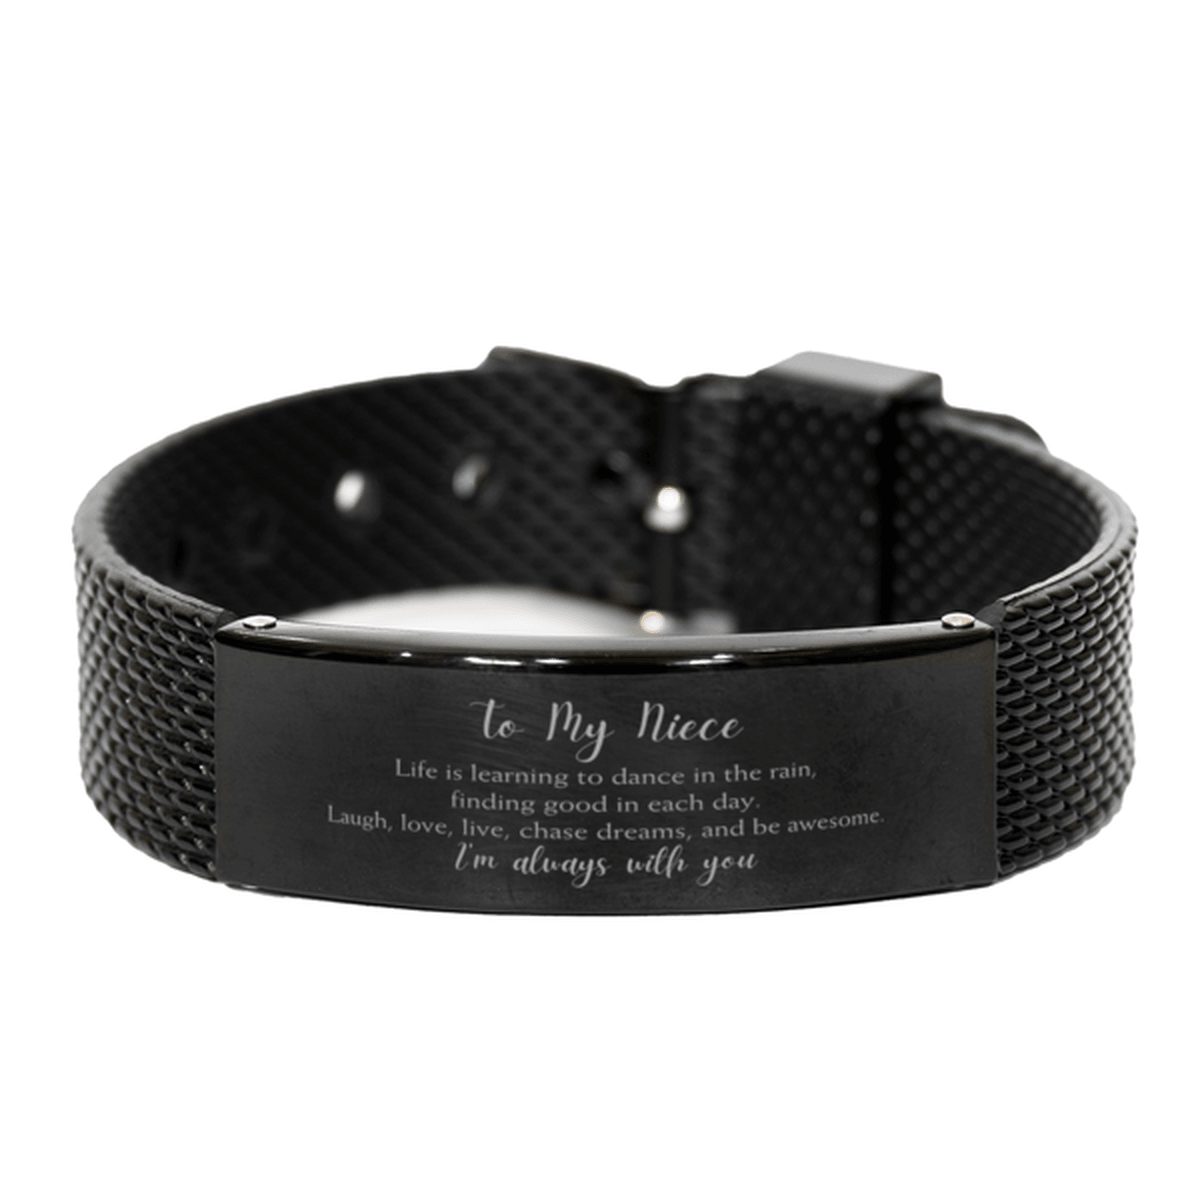 Niece Christmas Perfect Gifts, Niece Black Shark Mesh Bracelet, Motivational Niece Engraved Gifts, Birthday Gifts For Niece, To My Niece Life is learning to dance in the rain, finding good in each day. I'm always with you